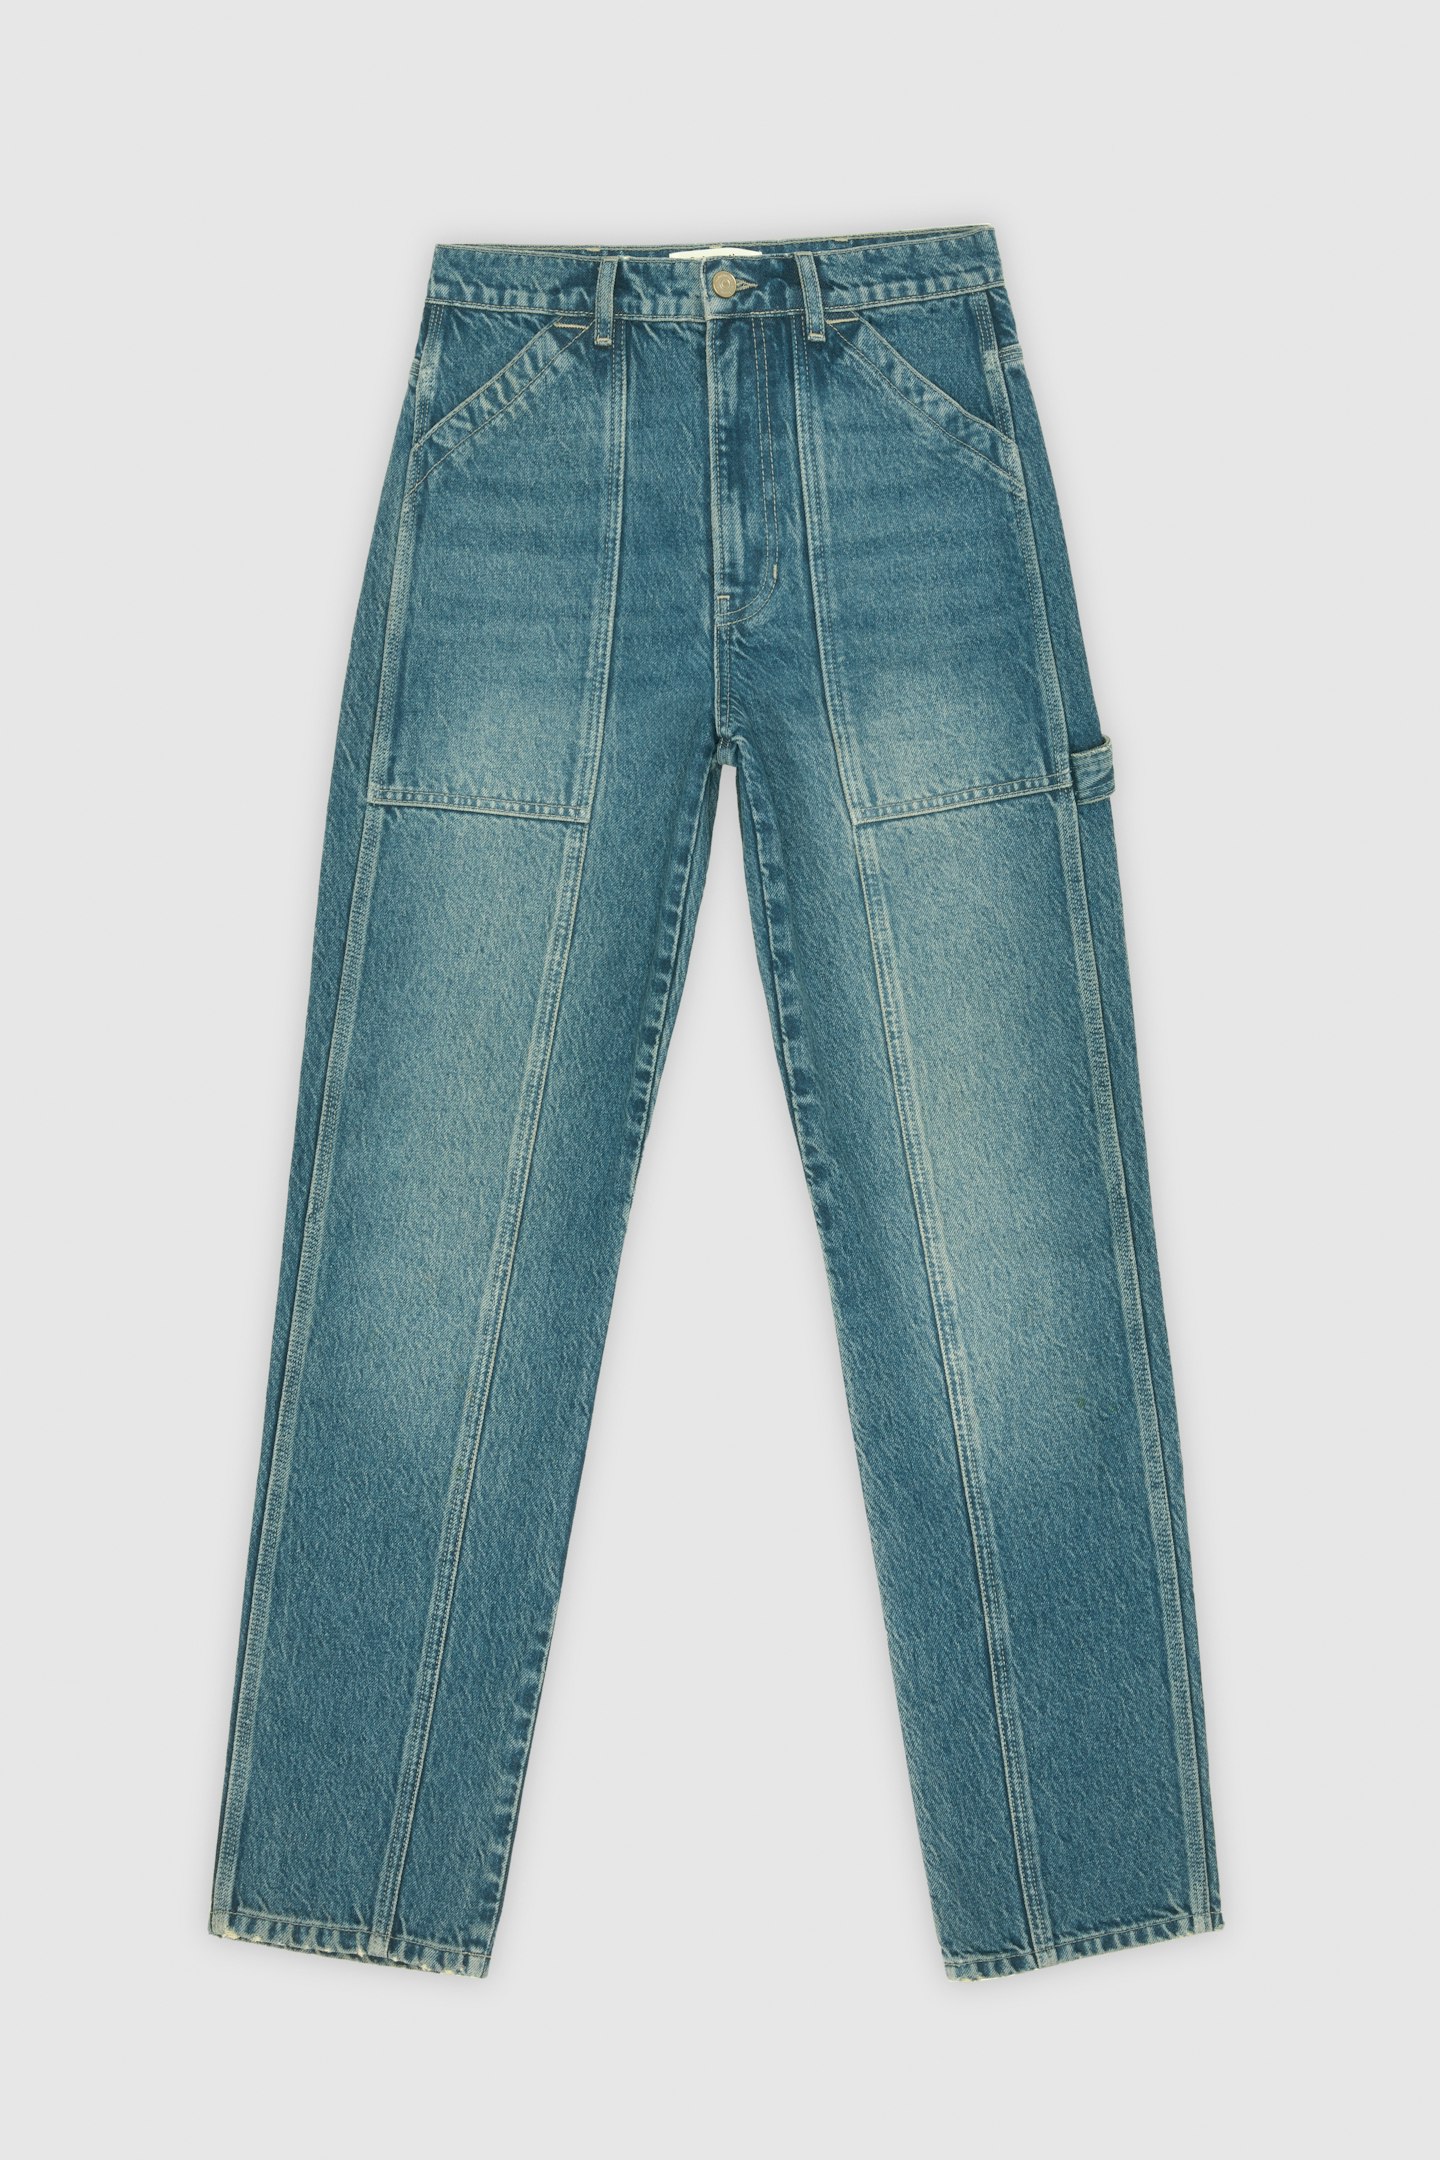 Reformation, Kealy Carpenter High-Rise Relaxed Jeans, £160